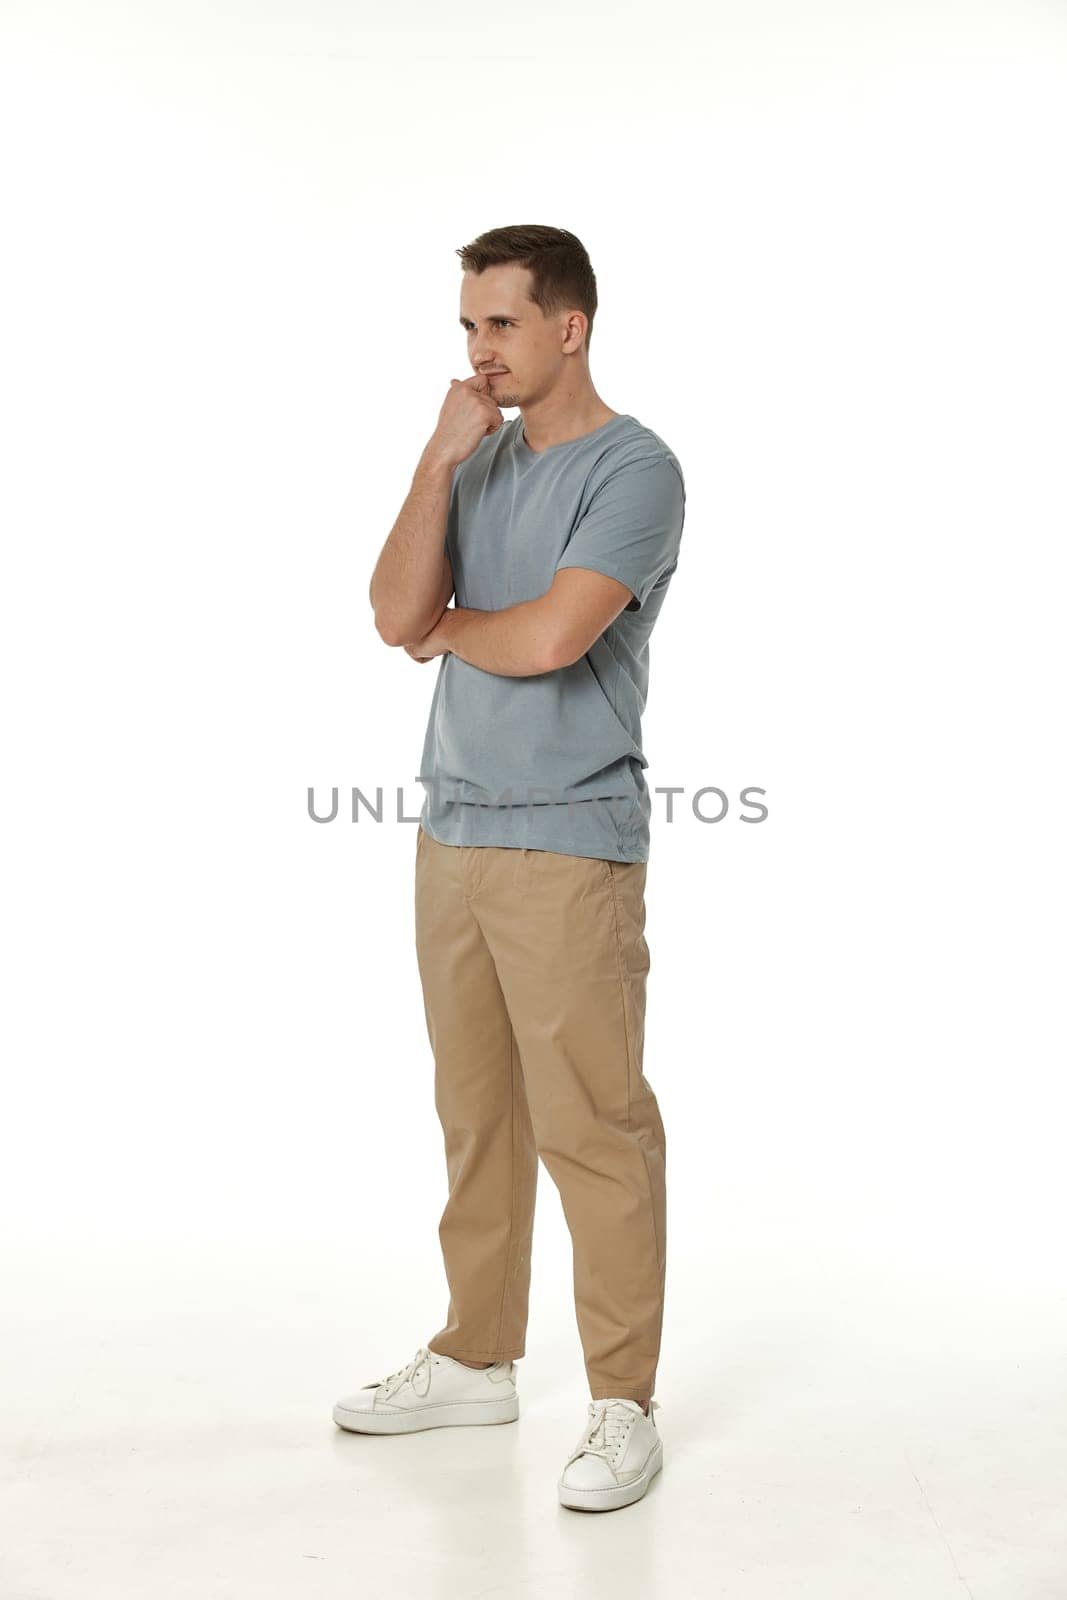 disappointed young man on white background. sadness